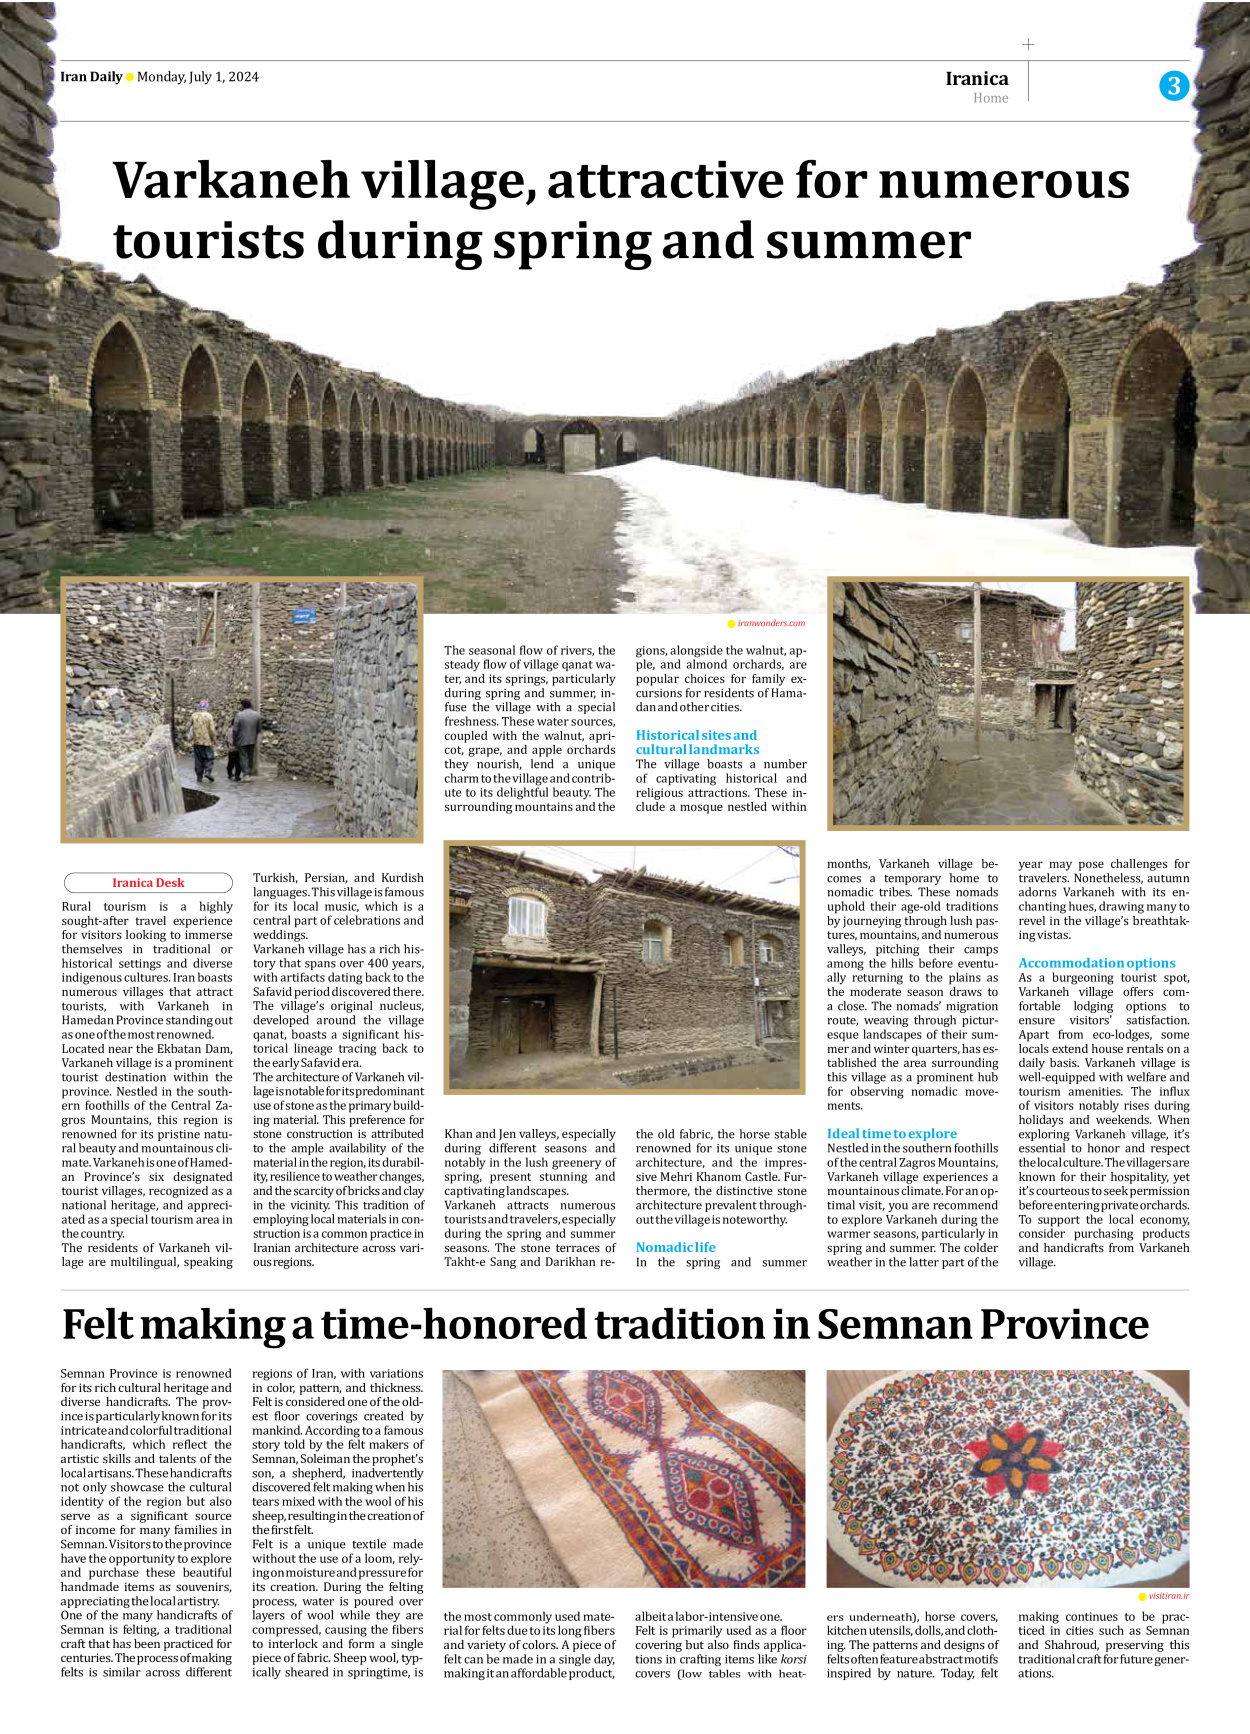 Iran Daily - Number Seven Thousand Five Hundred and Ninety Three - 01 July 2024 - Page 3